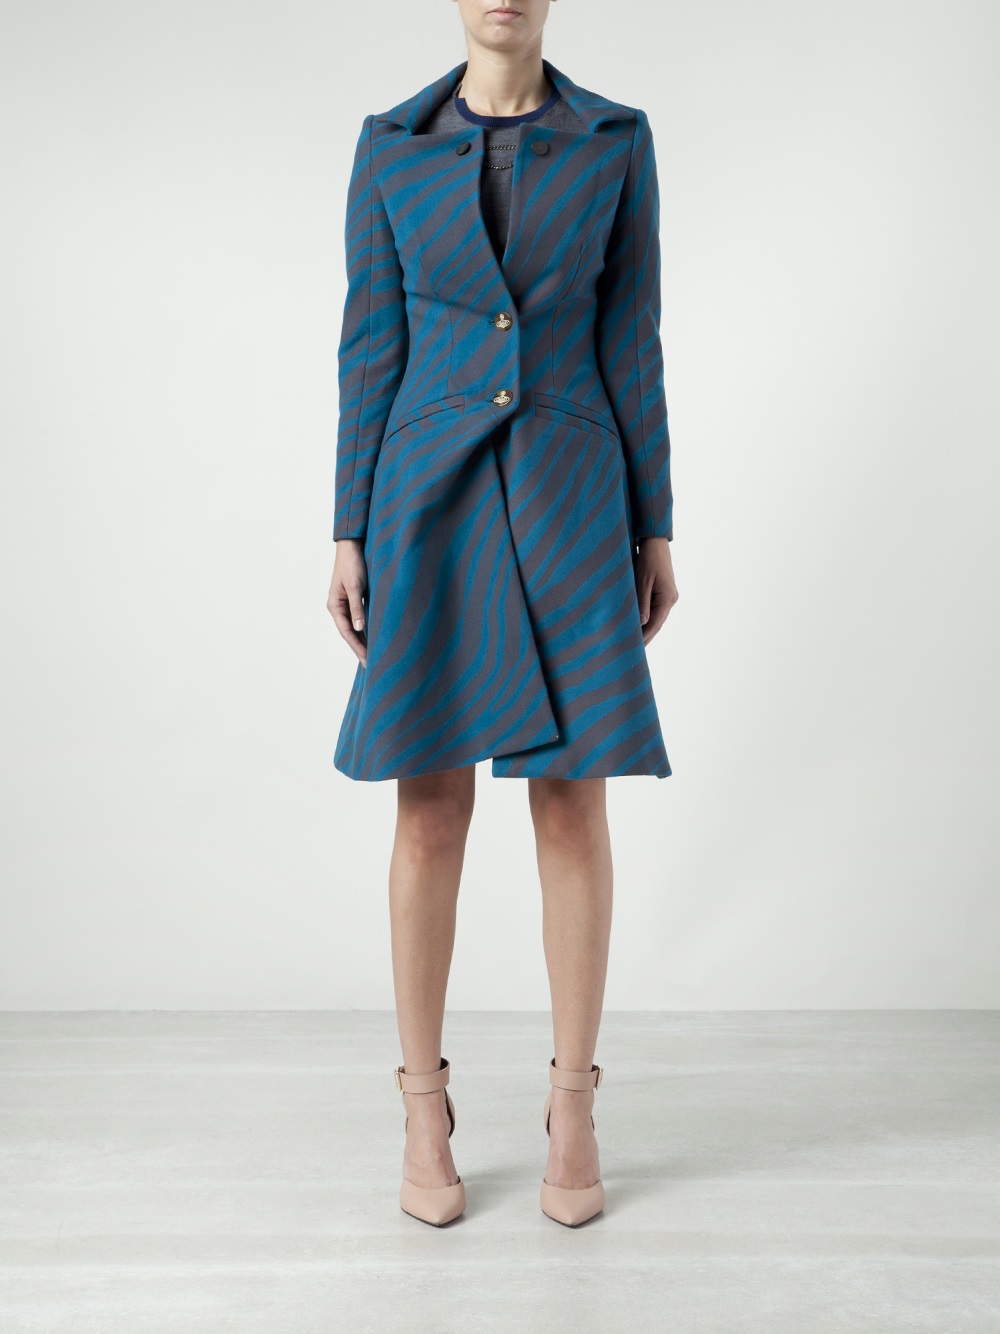 Lyst - Vivienne Westwood Red Label Cappotto Coat in Blue